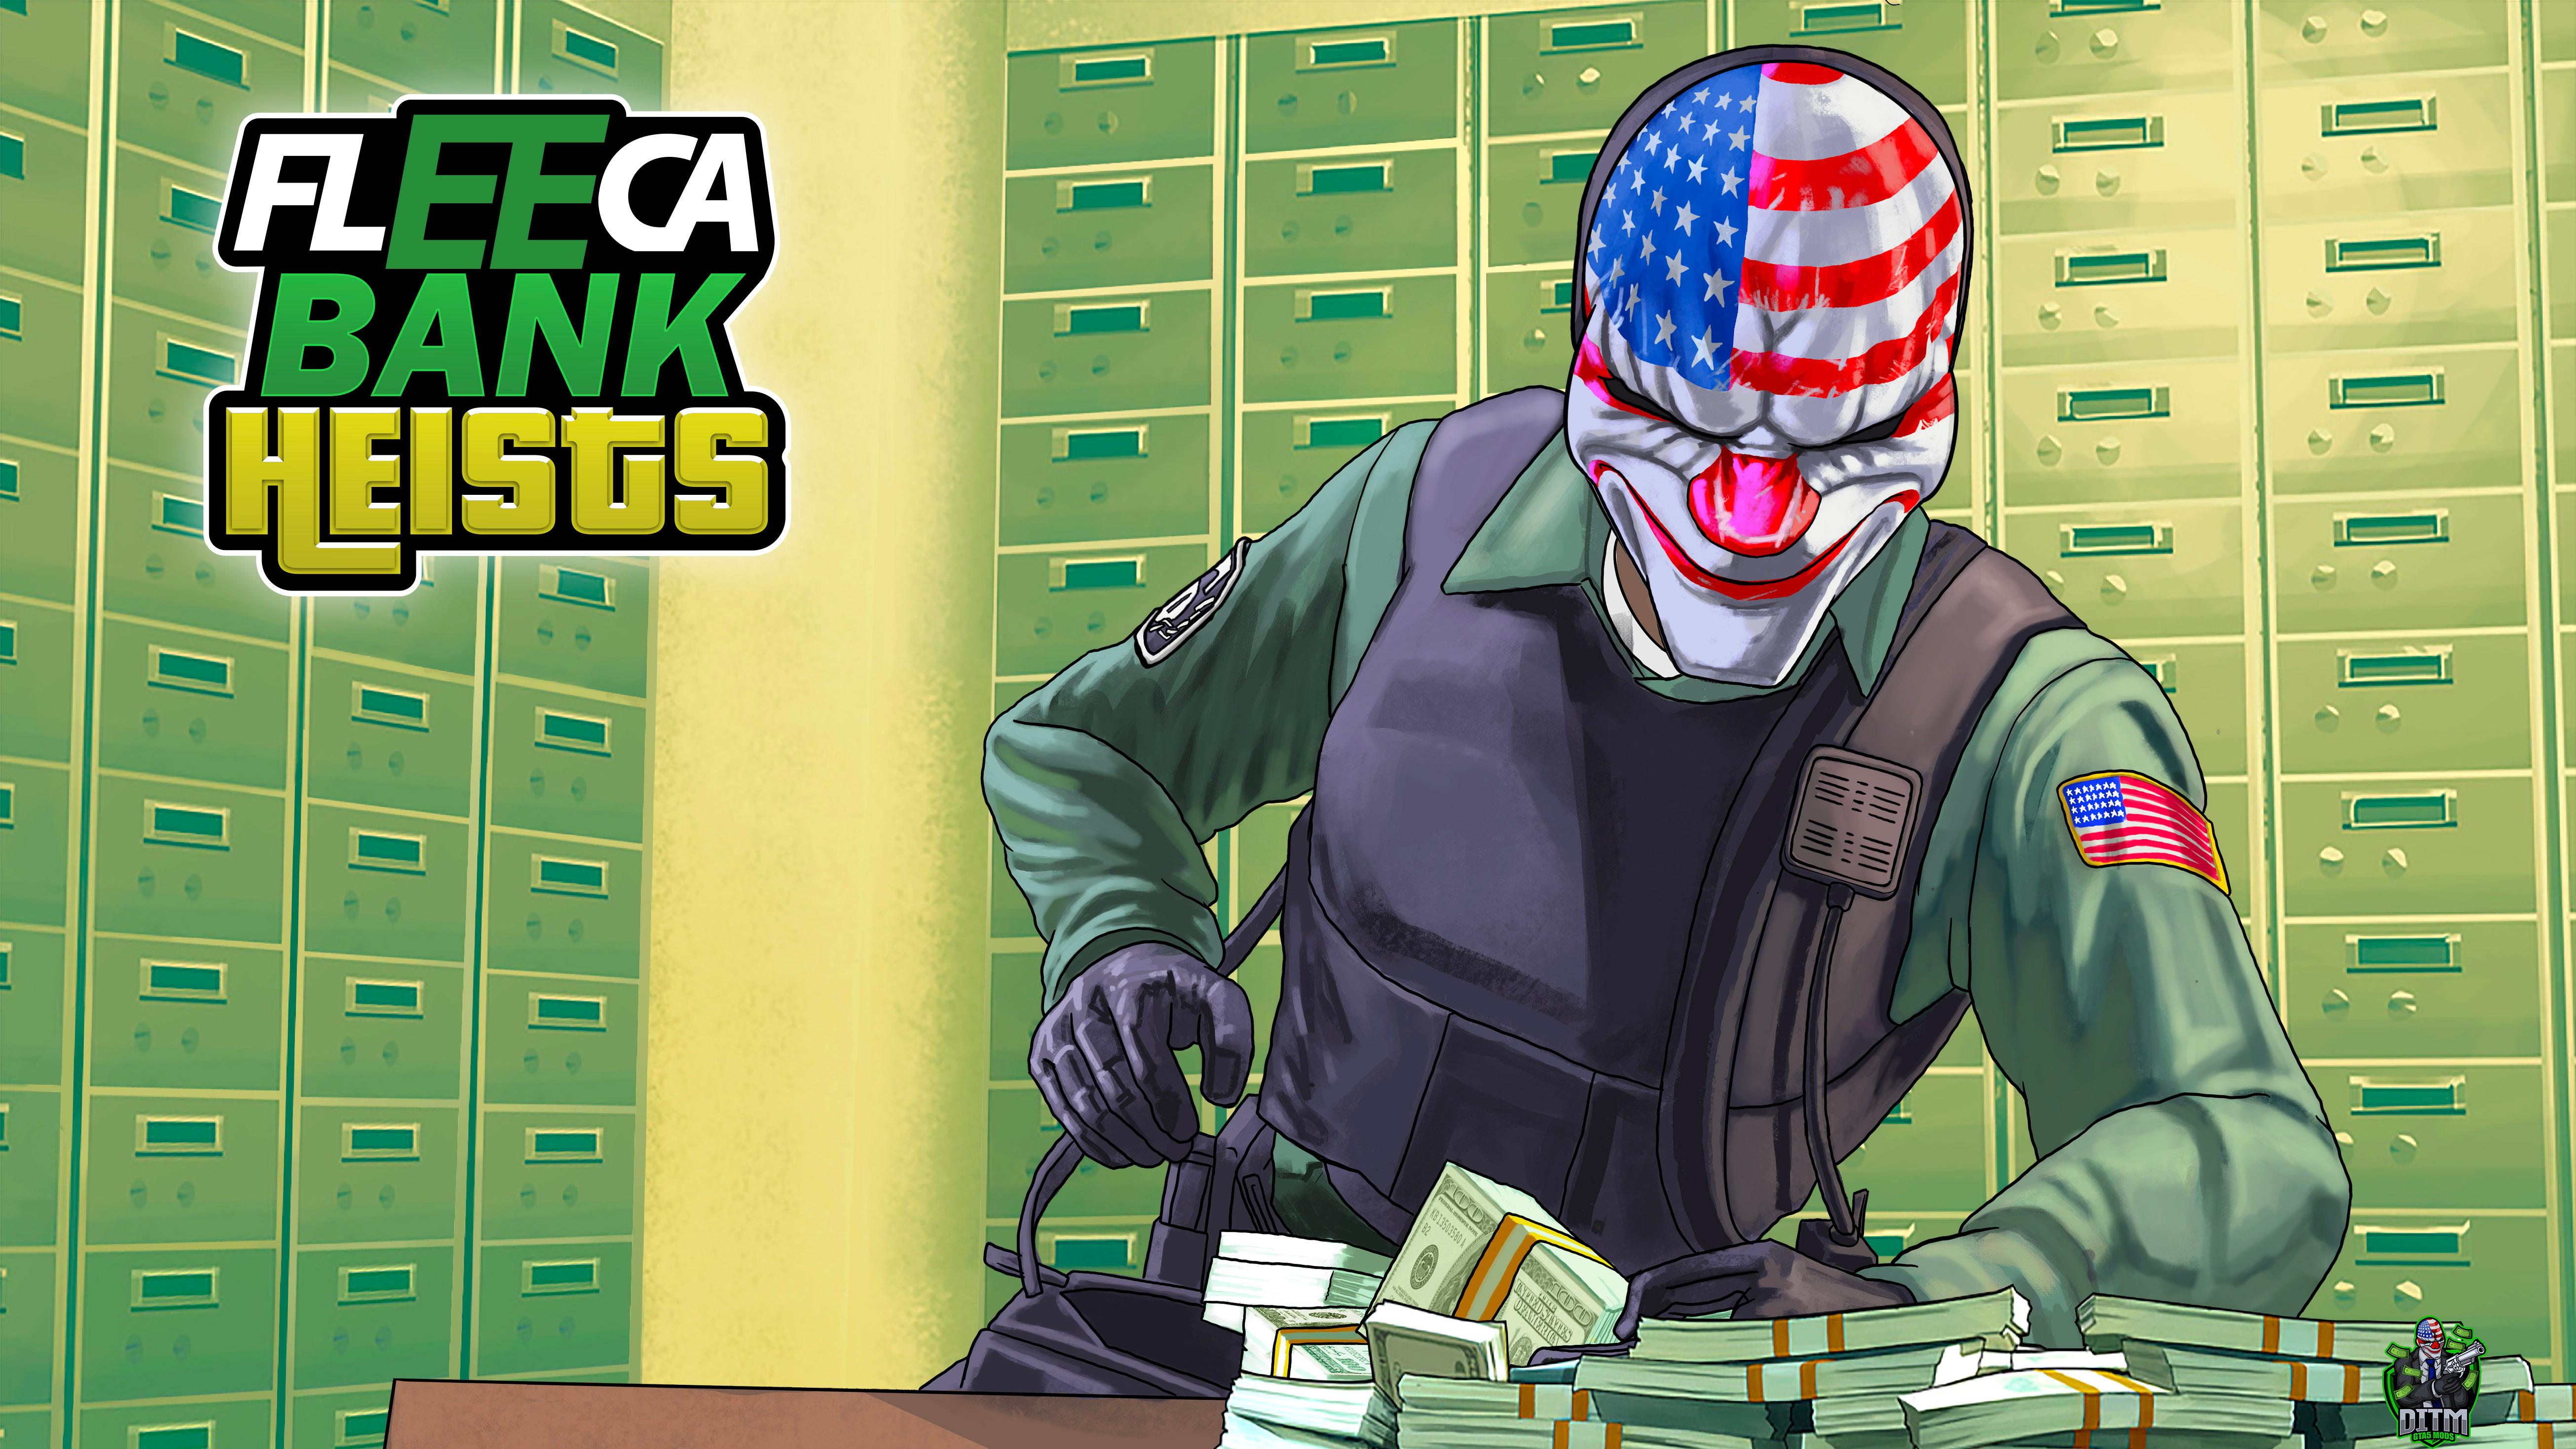 payday 2 trainer 1.43